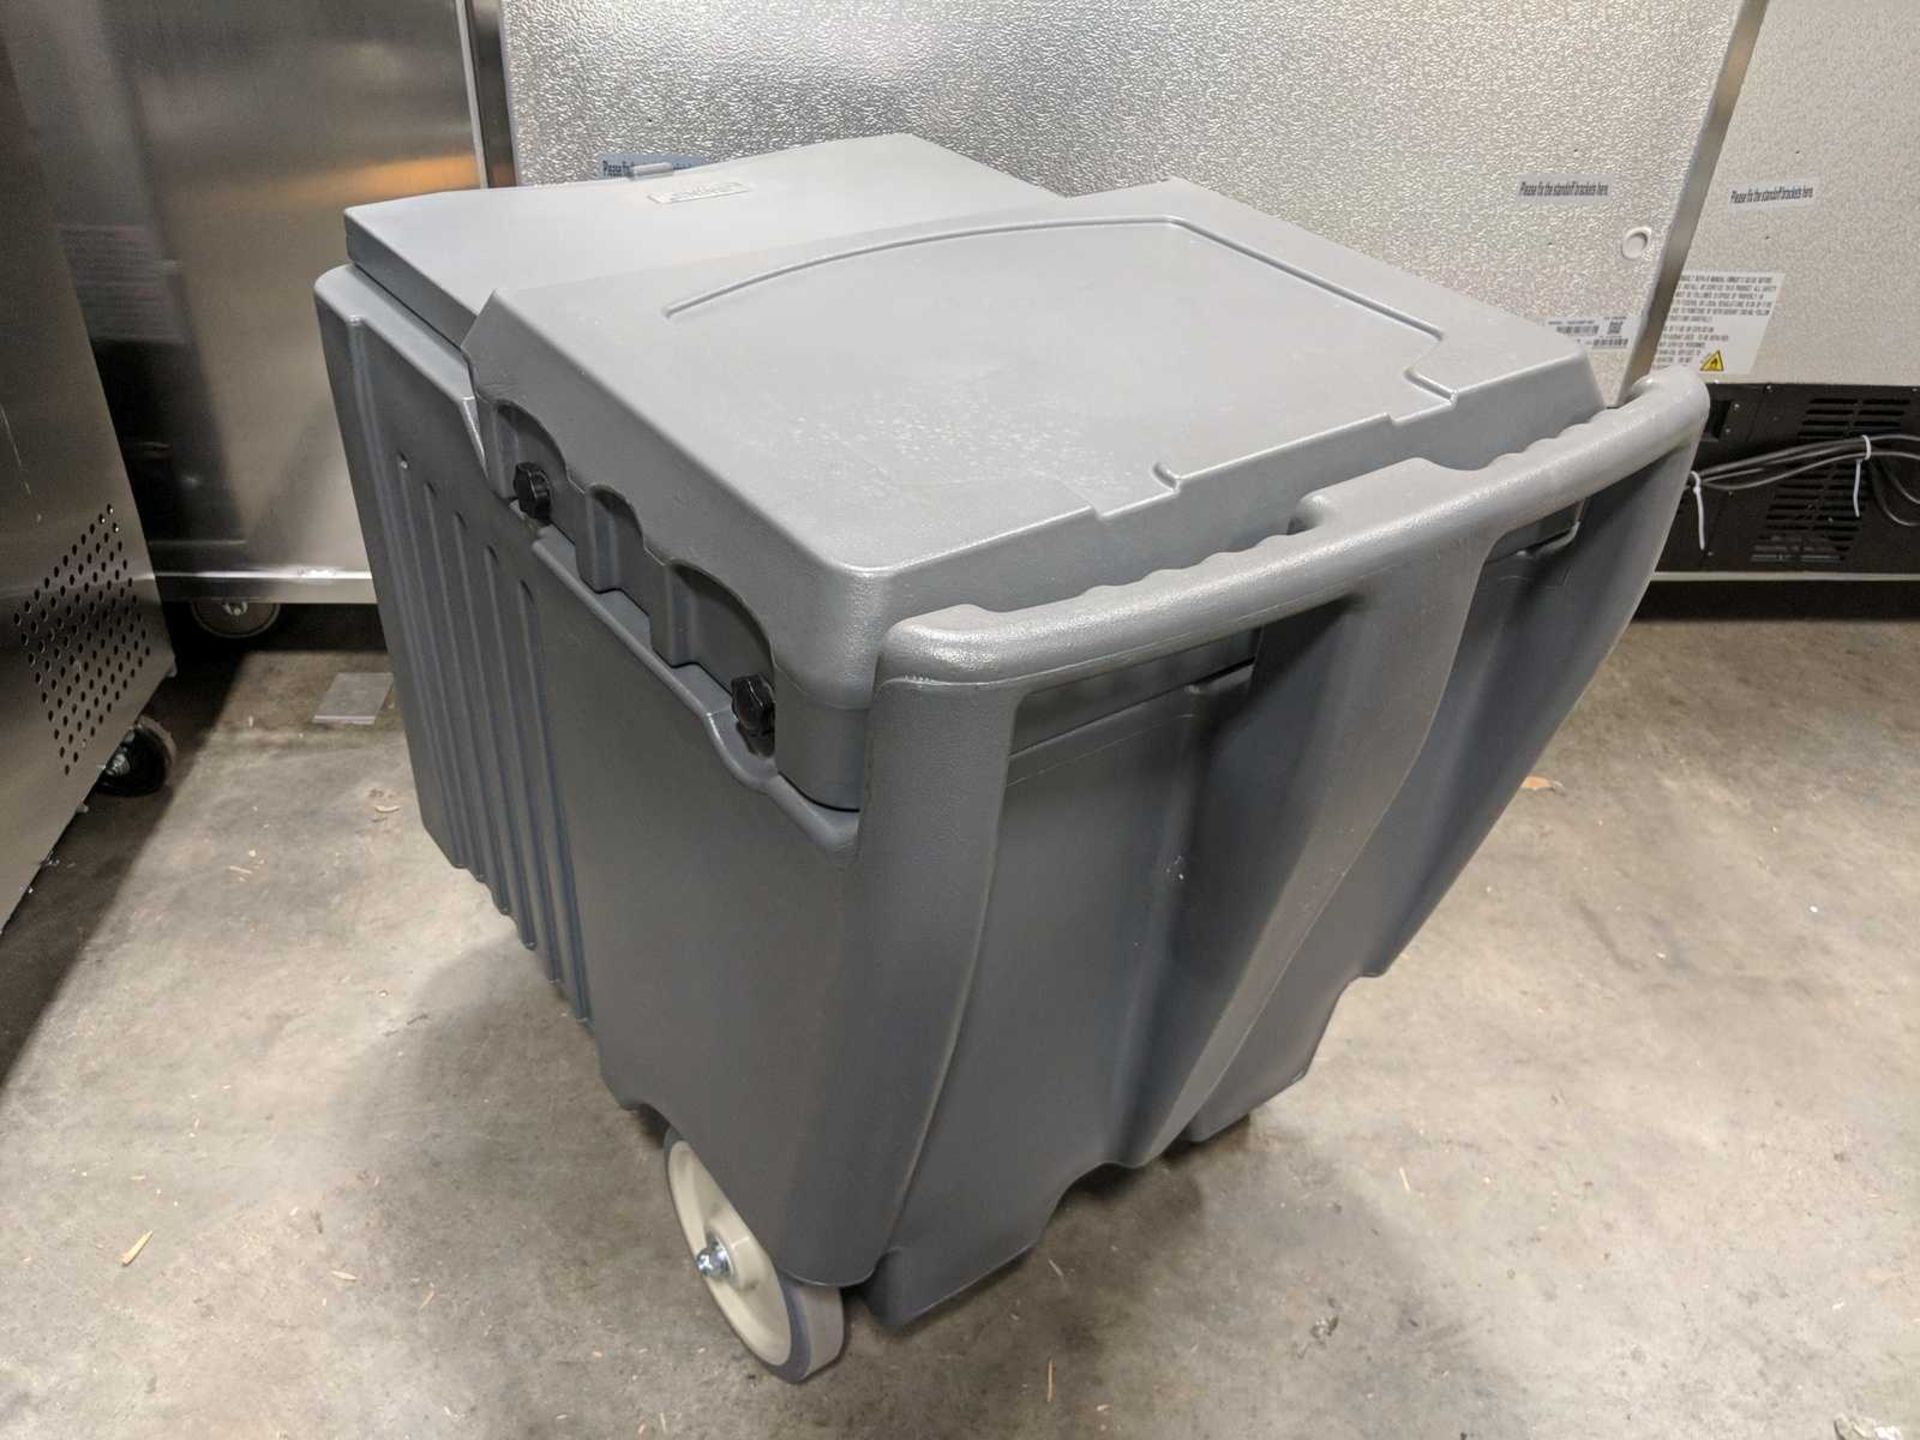 125lb Insulated Ice Caddy with Drain - Image 2 of 5